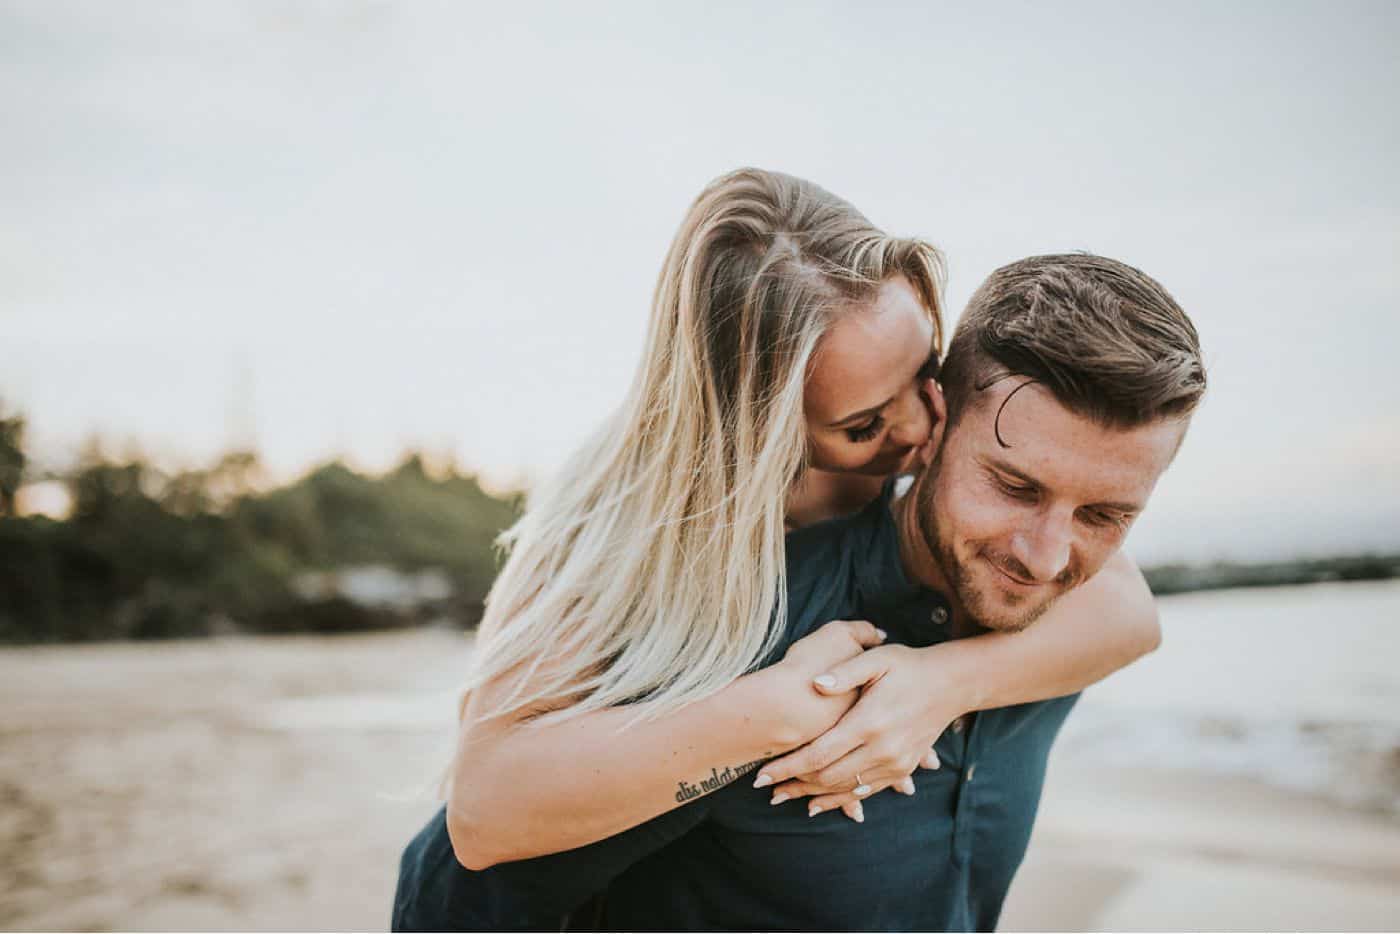 Proposal Photo Tricks With A Professional Photographer